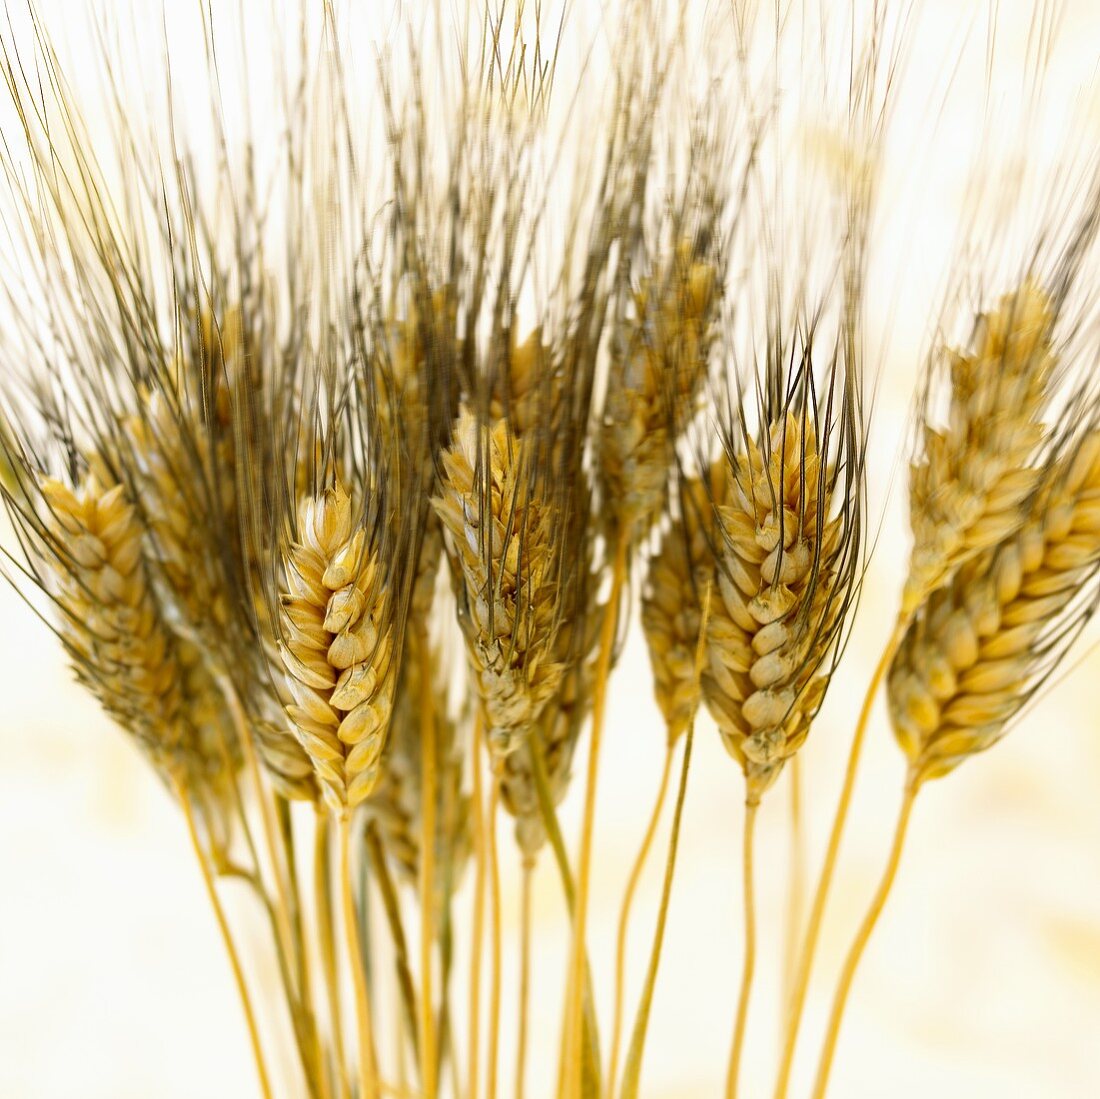 Several ears of wheat